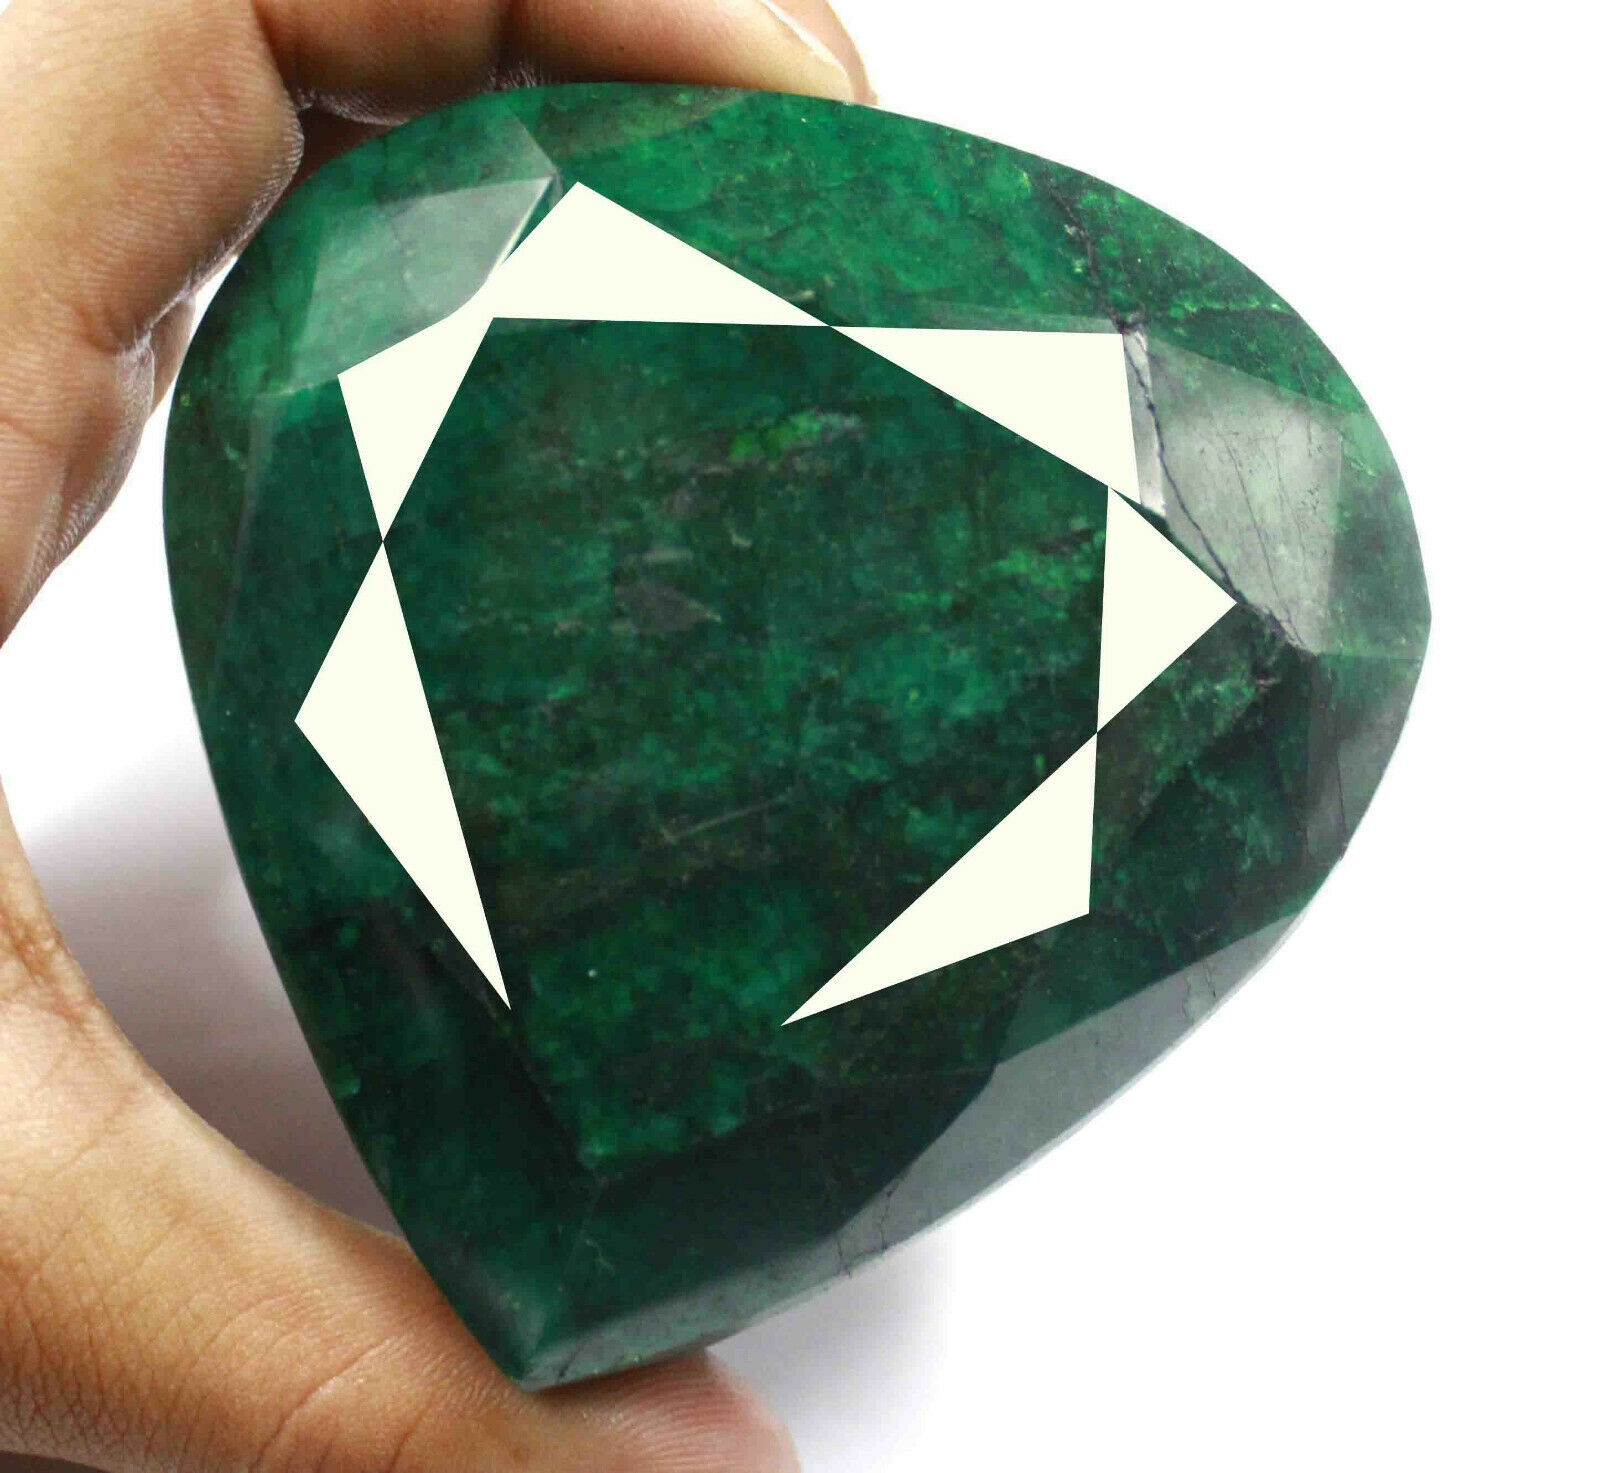 2714 Ct Certified Pear Shape Finest Quality Green Emerald Natural Gemstone Mg129